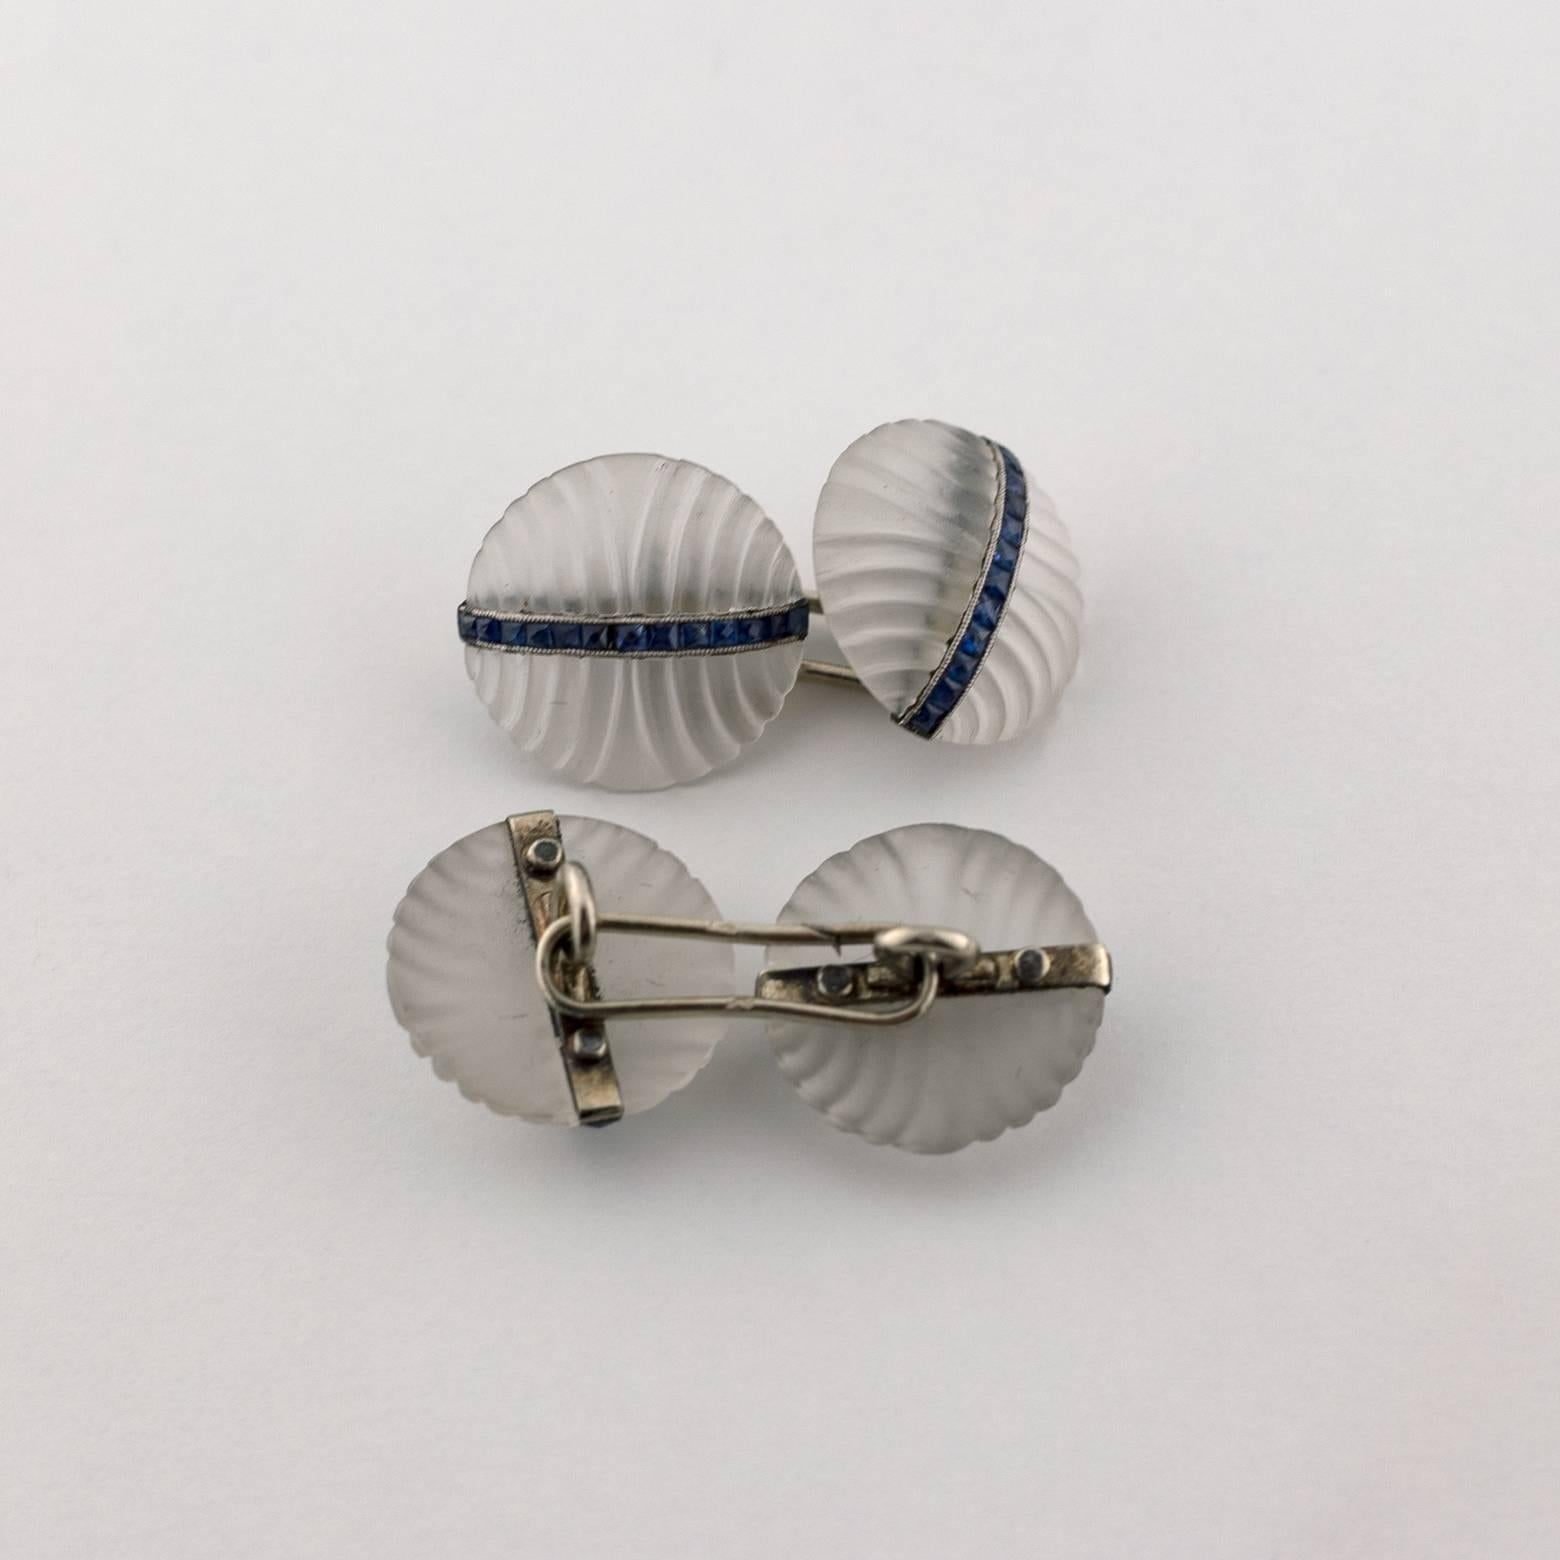 Gifts for him or her ! These cufflinks from the 1920's are stunning with a band of blue sapphires set in 18k white gold. Stunning simplicity... these cufflinks would be a wonderful gift for a man or a woman. They are French made, mark.